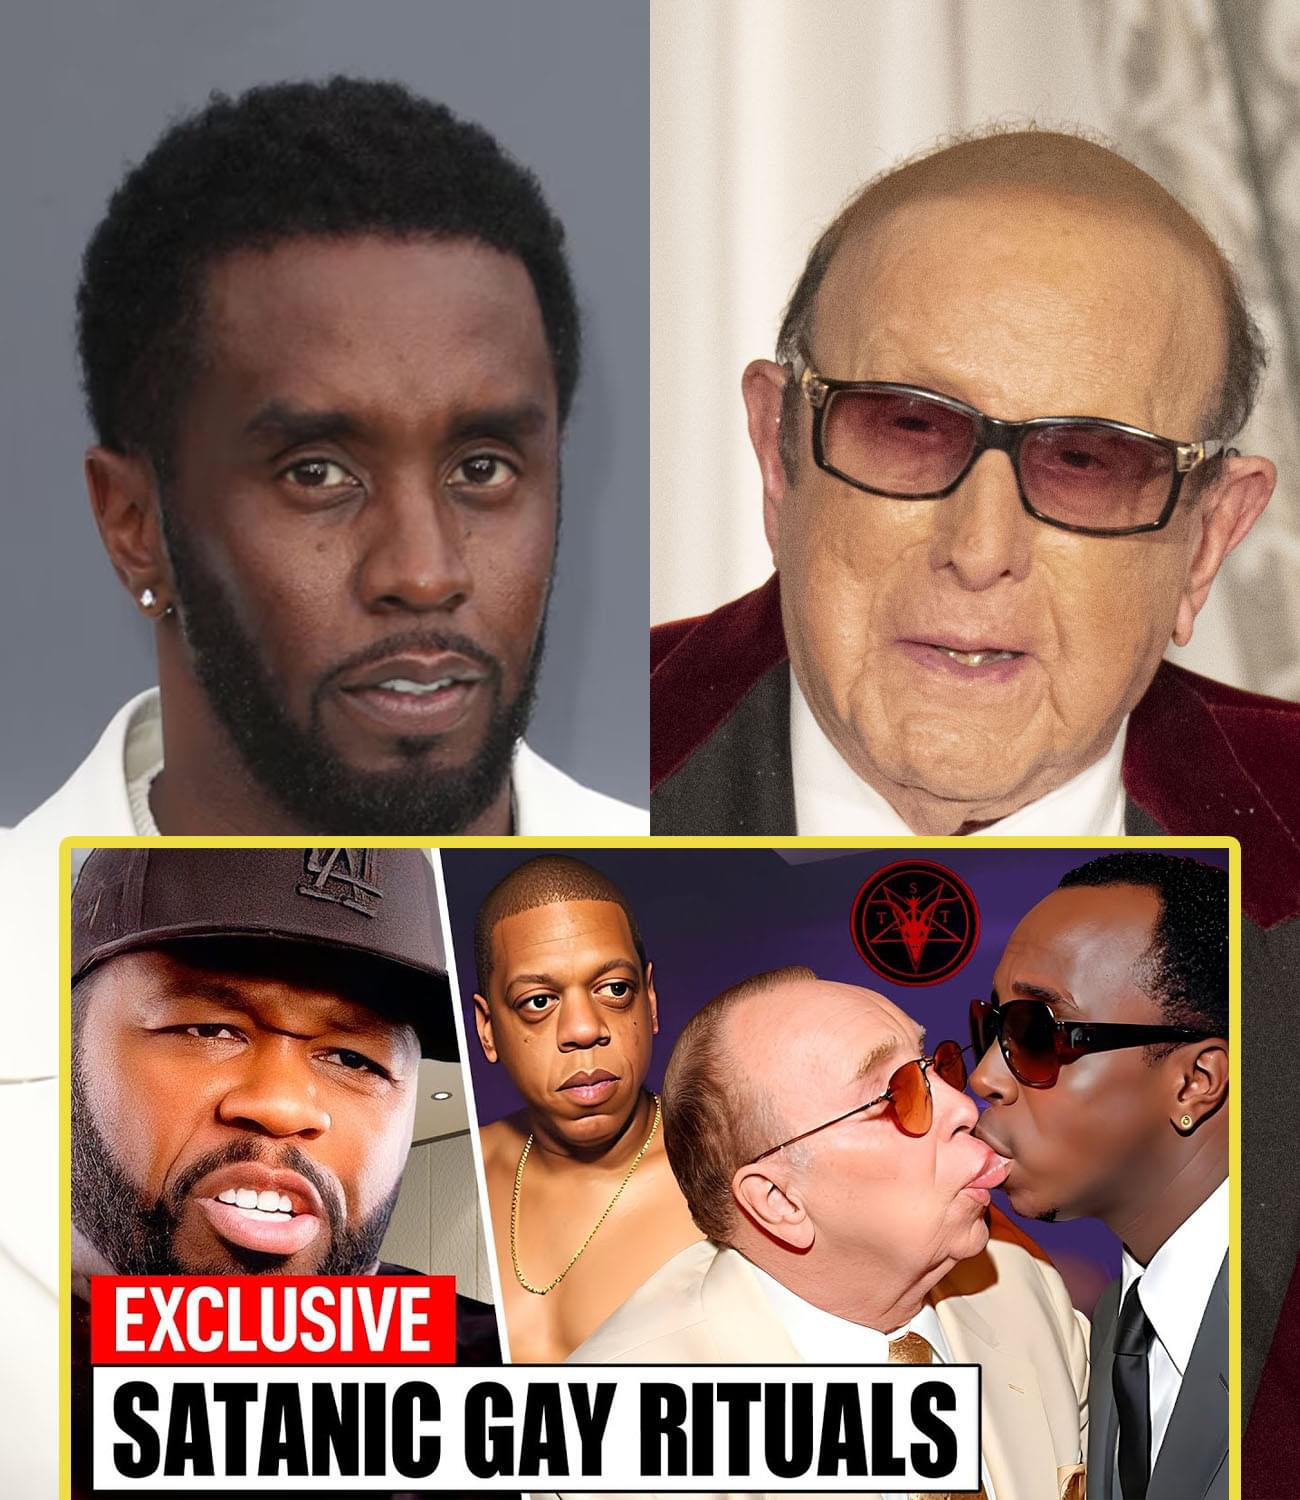 50 Cent Leaks NEW BRUTAL Details About Diddy, Clive Davis and Jay Z